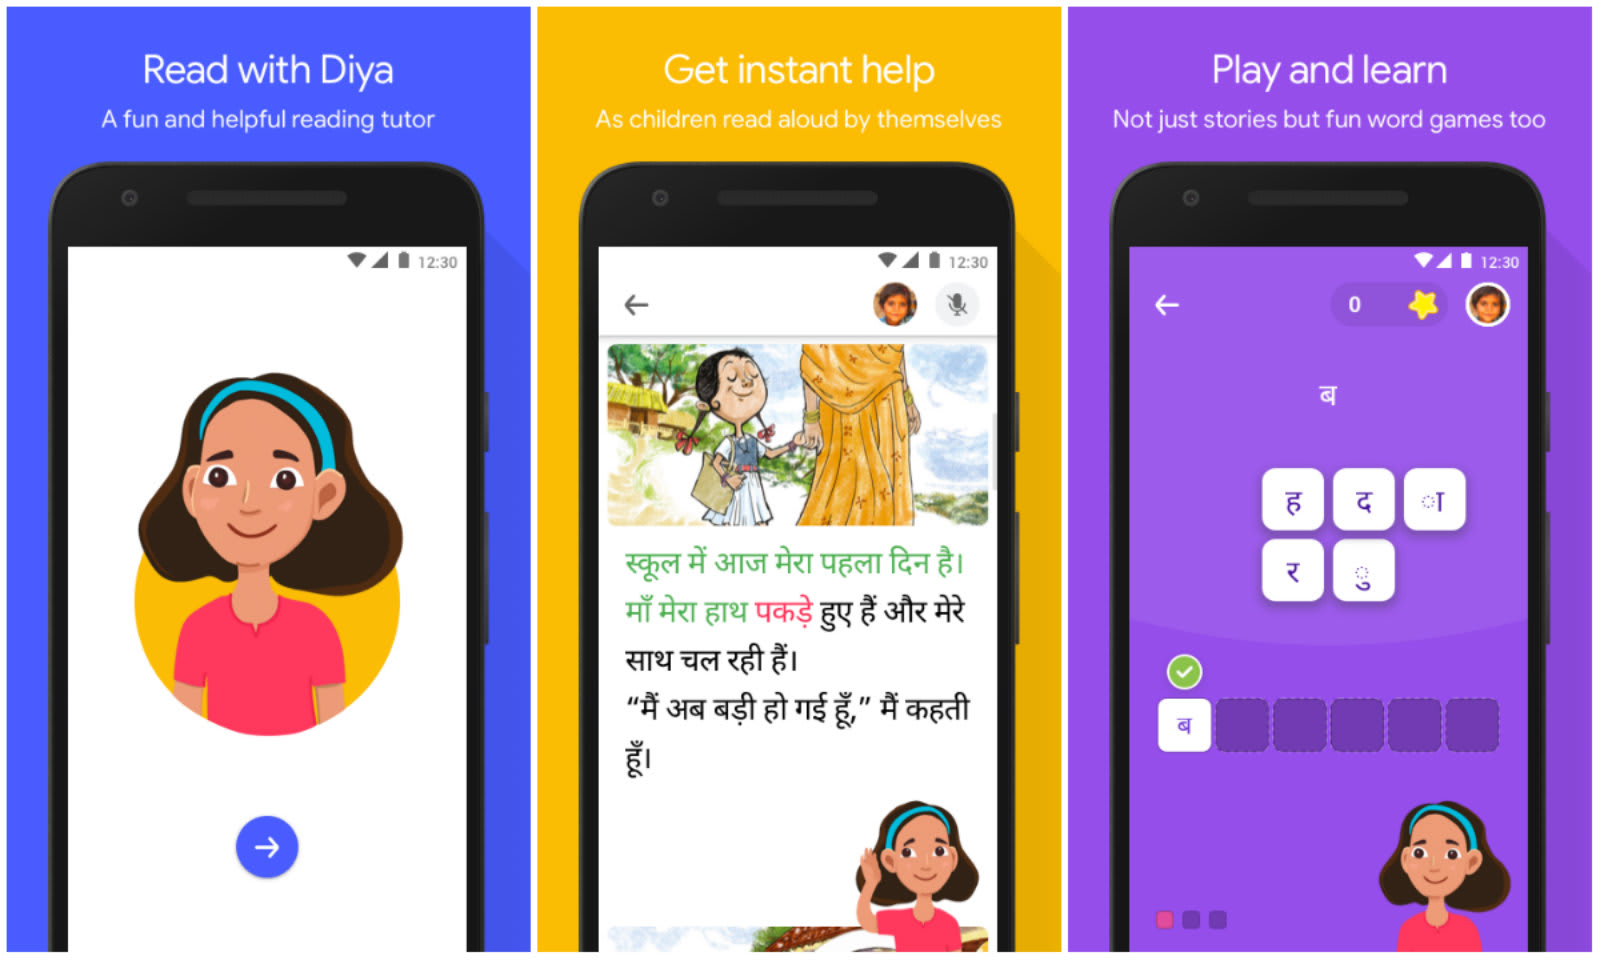 Google made a learn-to-read app for schoolchildren in India | Engadget1600 x 960